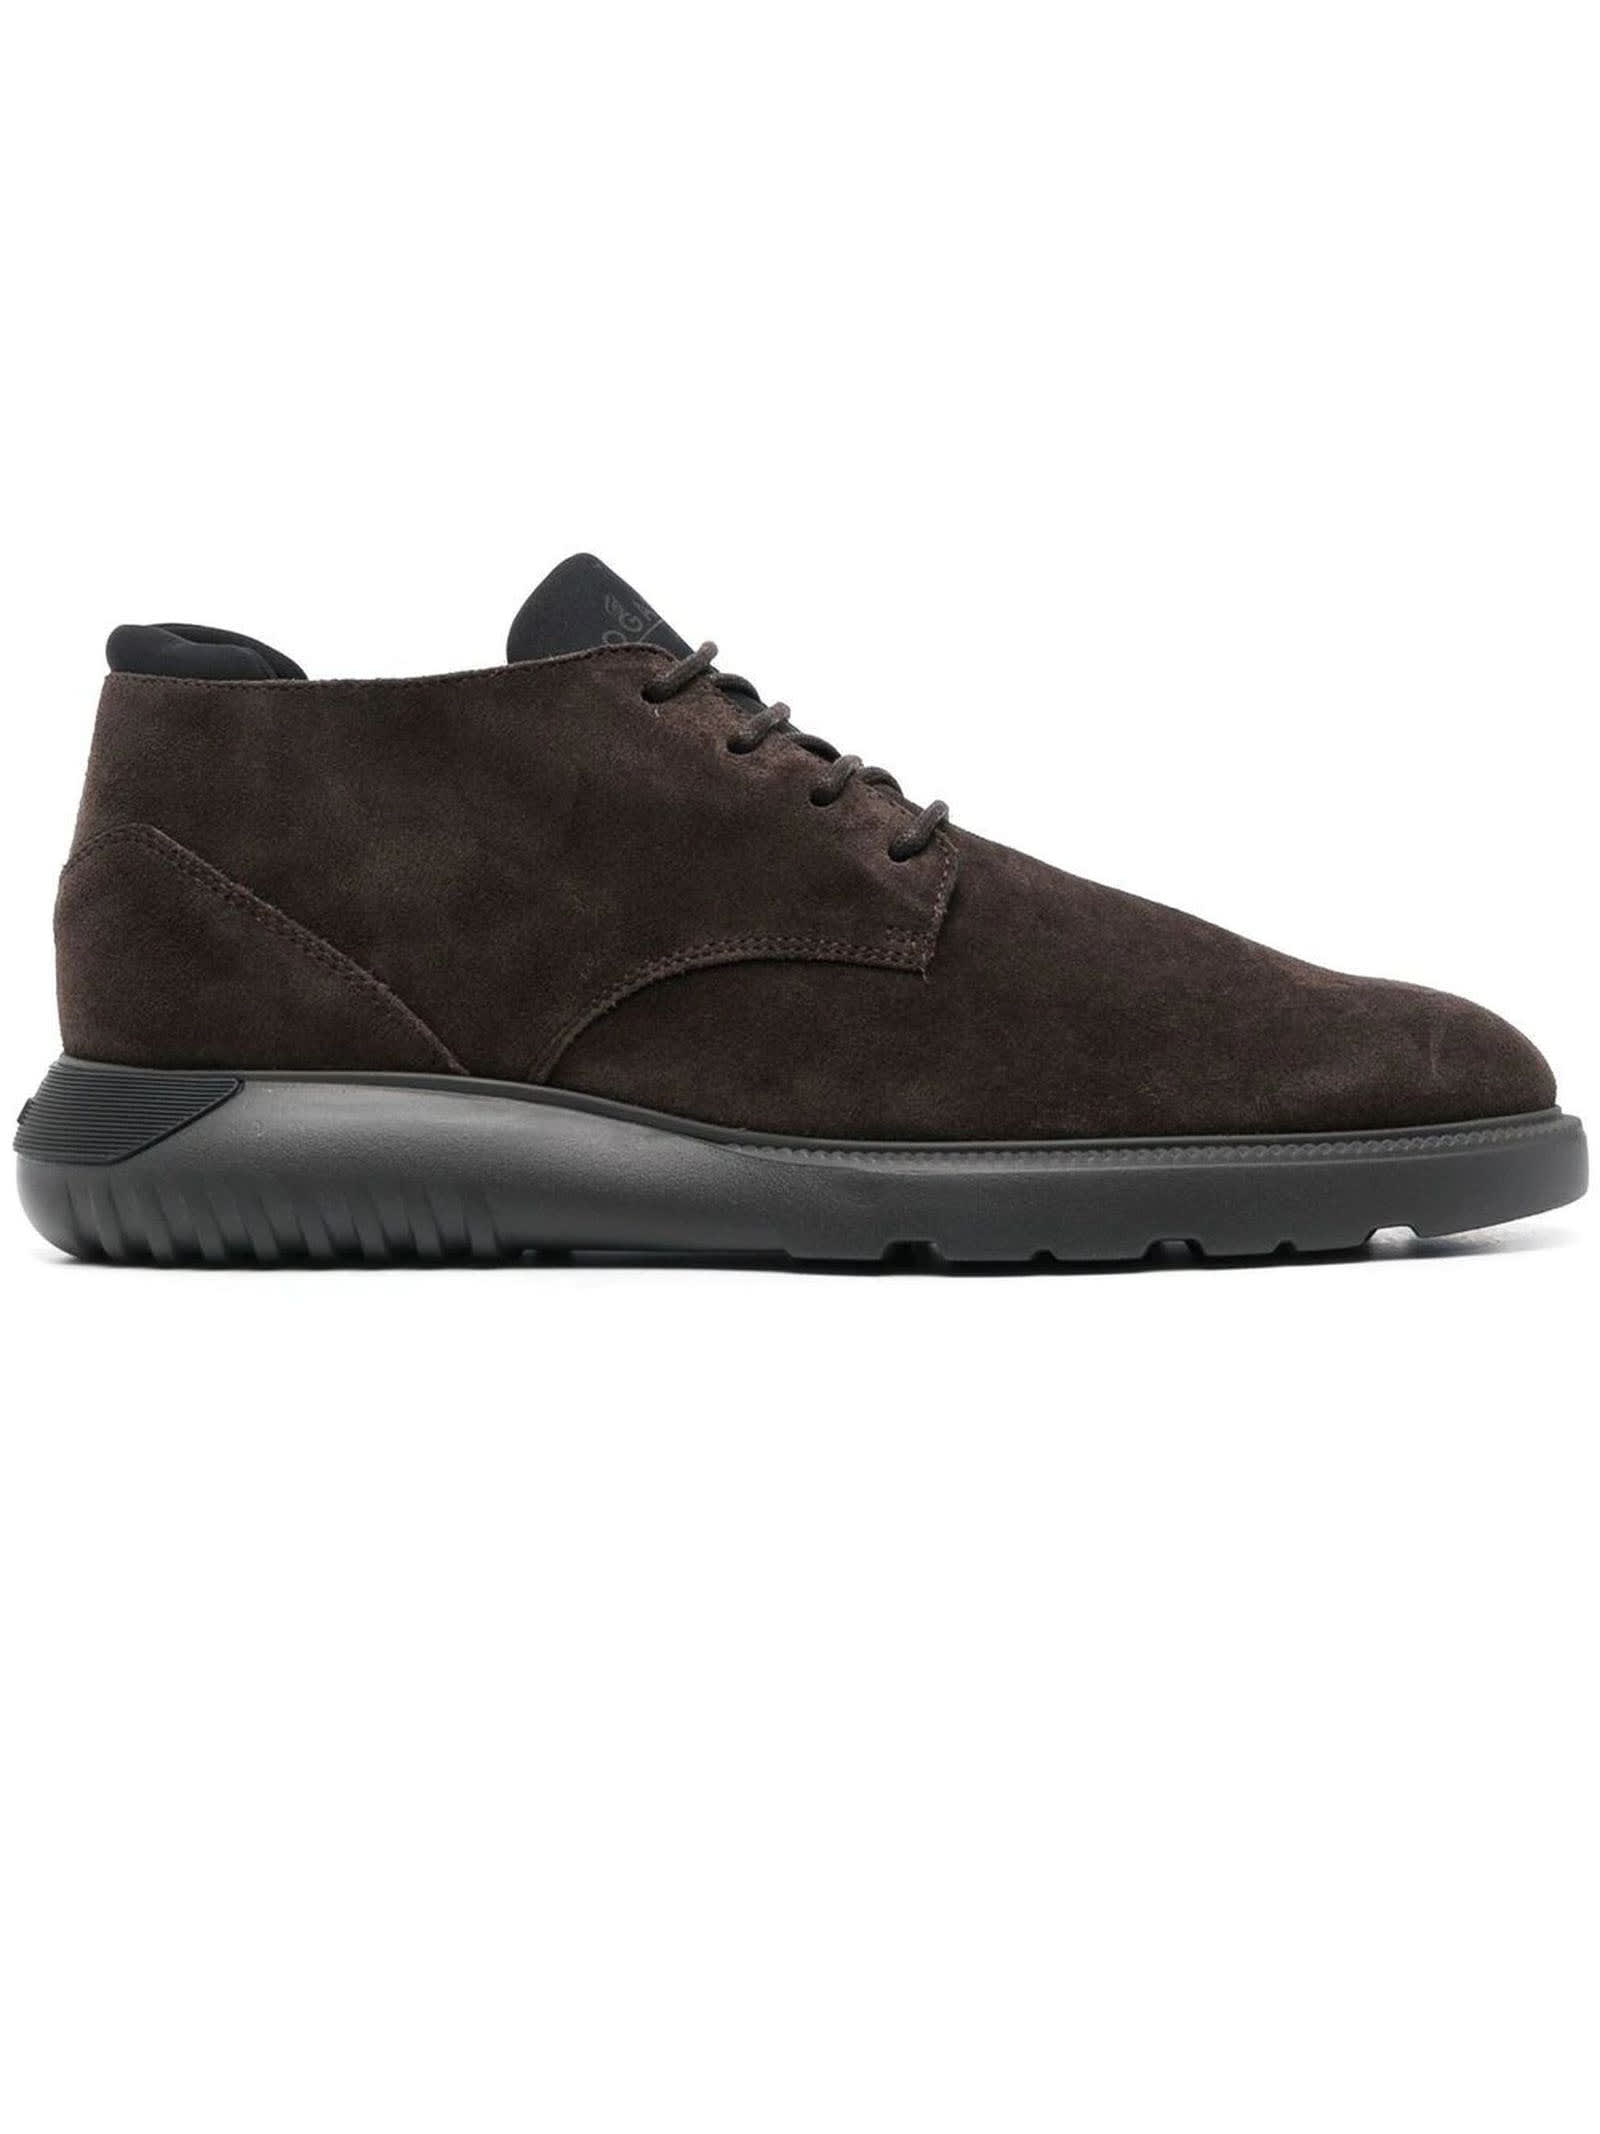 HOGAN H600 ANKLE BOOT IN SUEDE